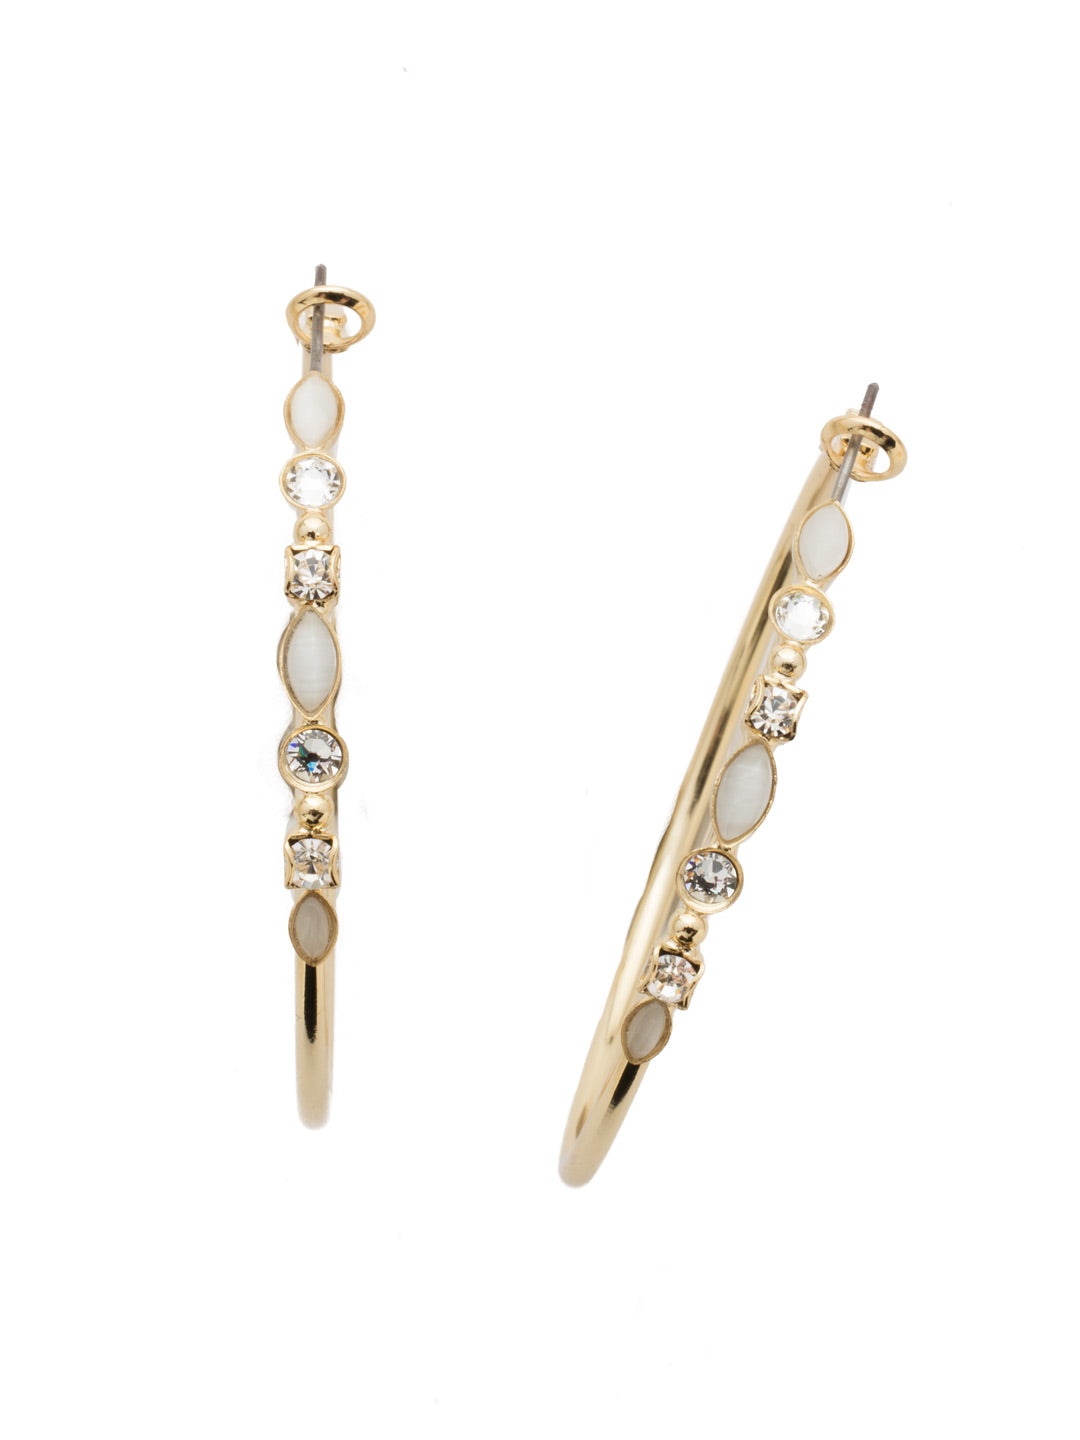 Mixed Media Hoop Earrings - EDK40BGCRY - <p>Hoop earrings with a line of assorted crystals and semi-precious stones that will add the perfect hint of sparkle to your look. From Sorrelli's Crystal collection in our Bright Gold-tone finish.</p>